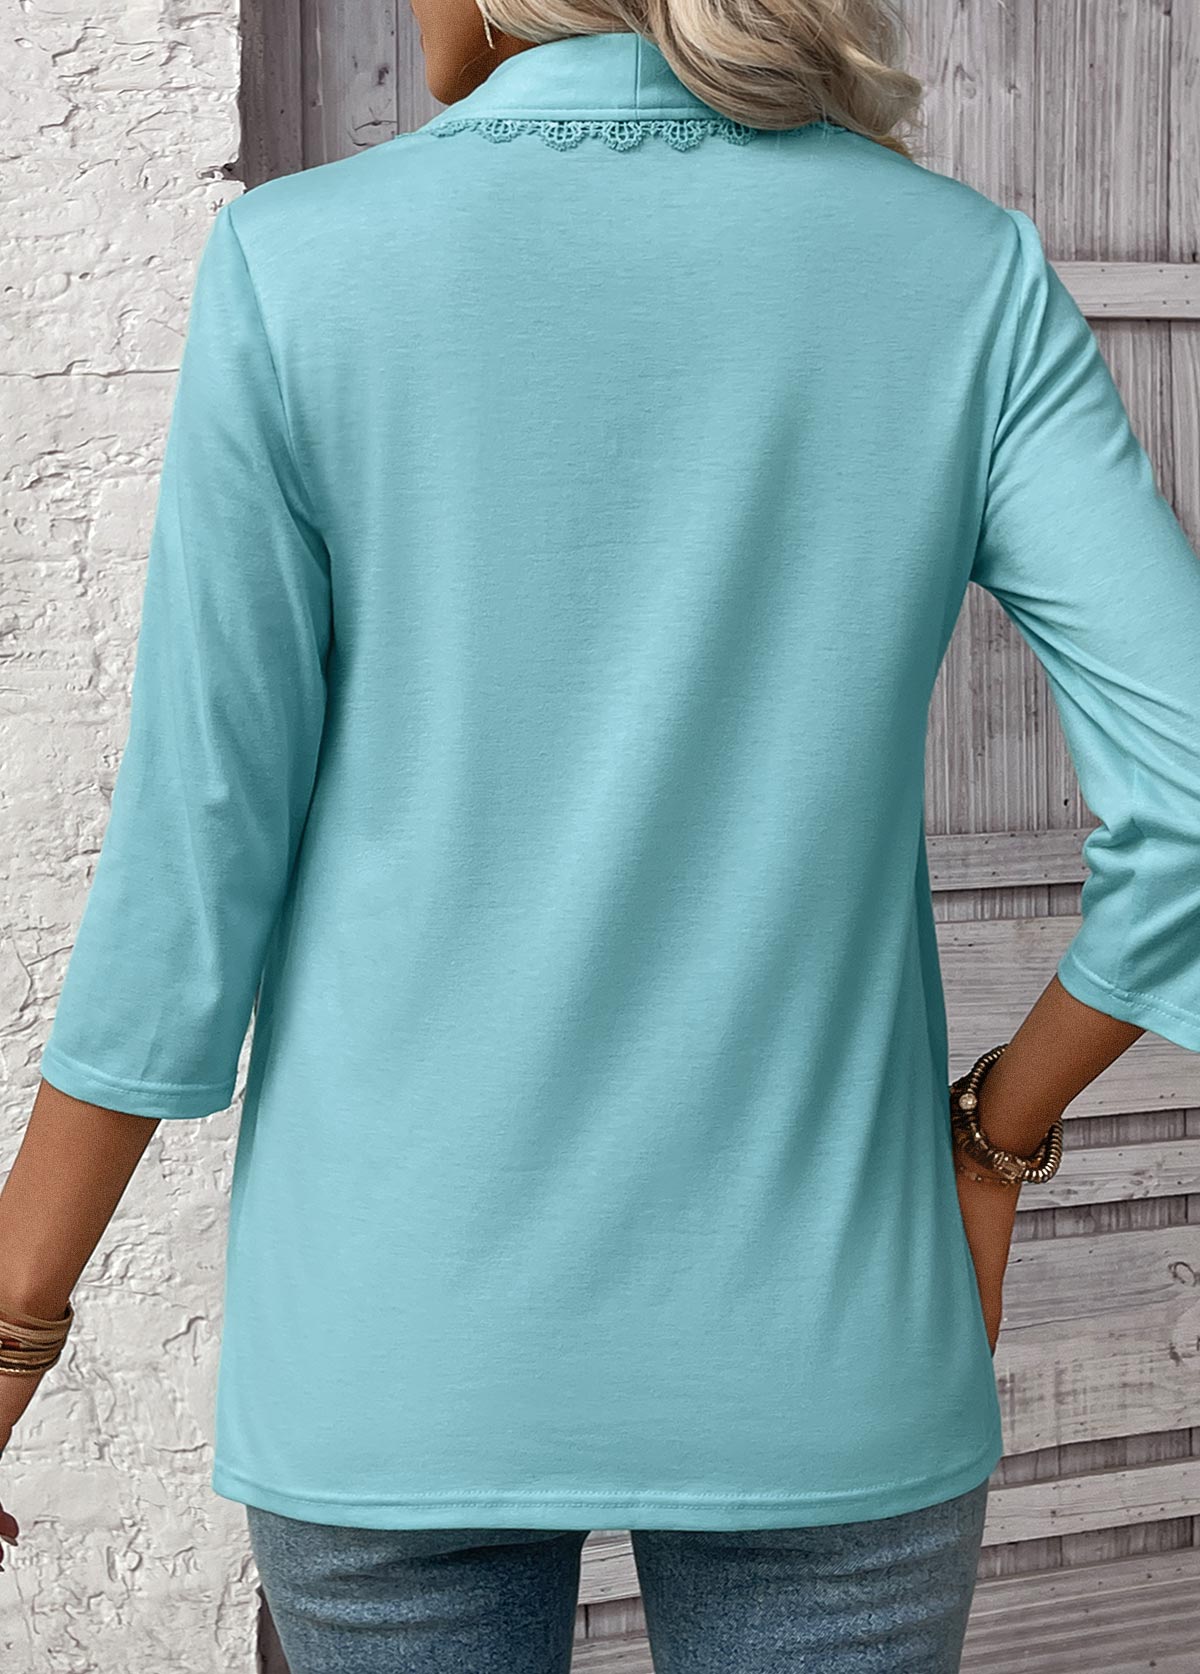 Lace Mint Green 3/4 Sleeve Square Neck T Shirt